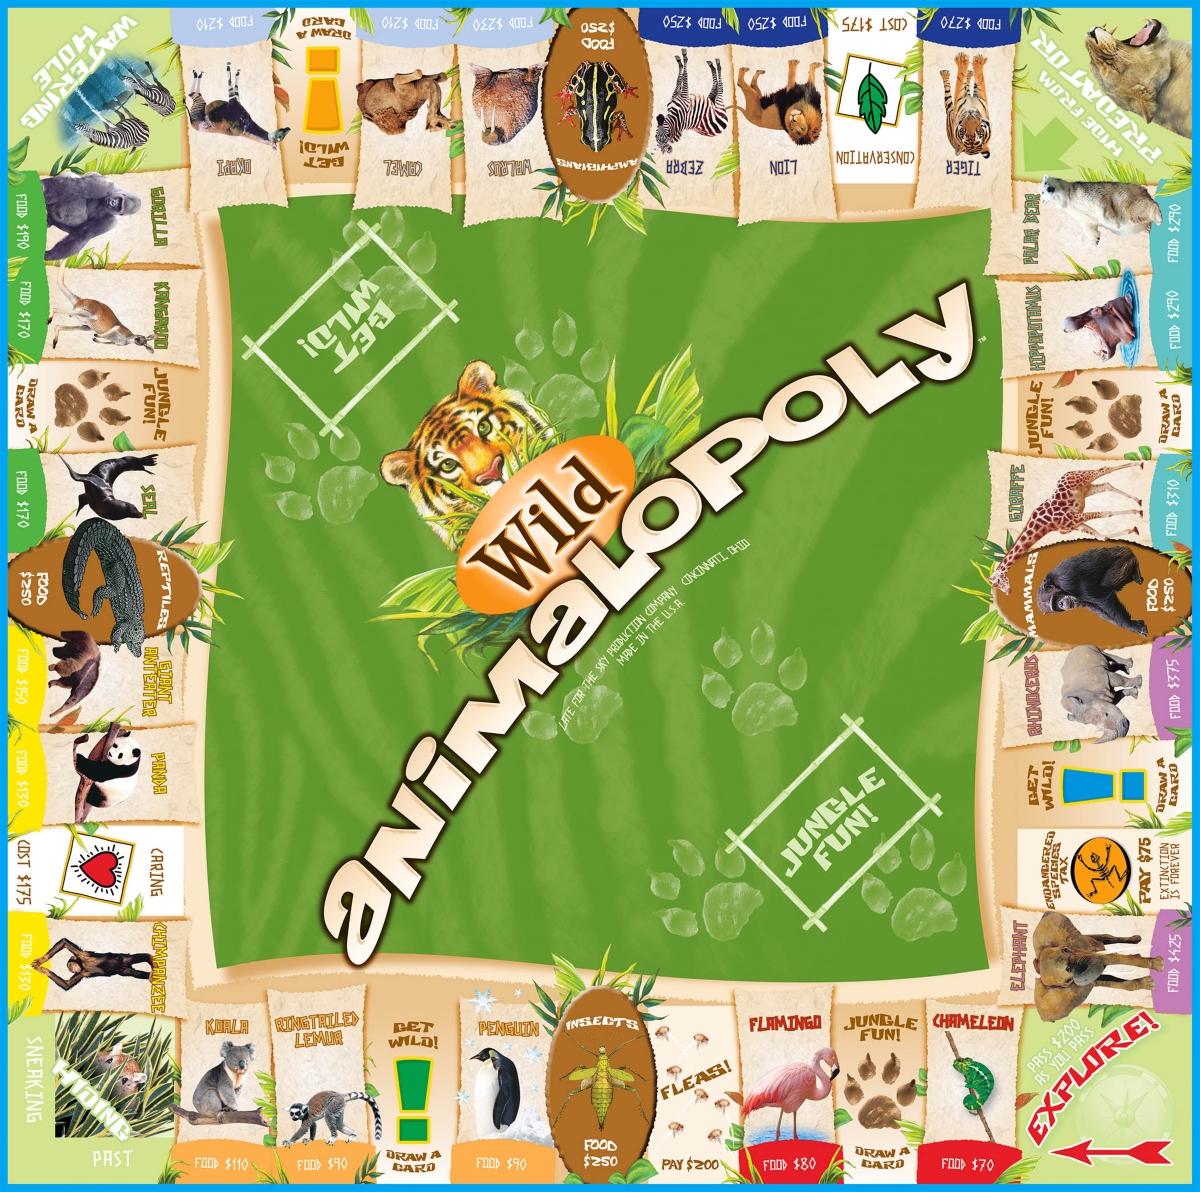 Shop Late For The Sky Wild Animalopoly In Multi